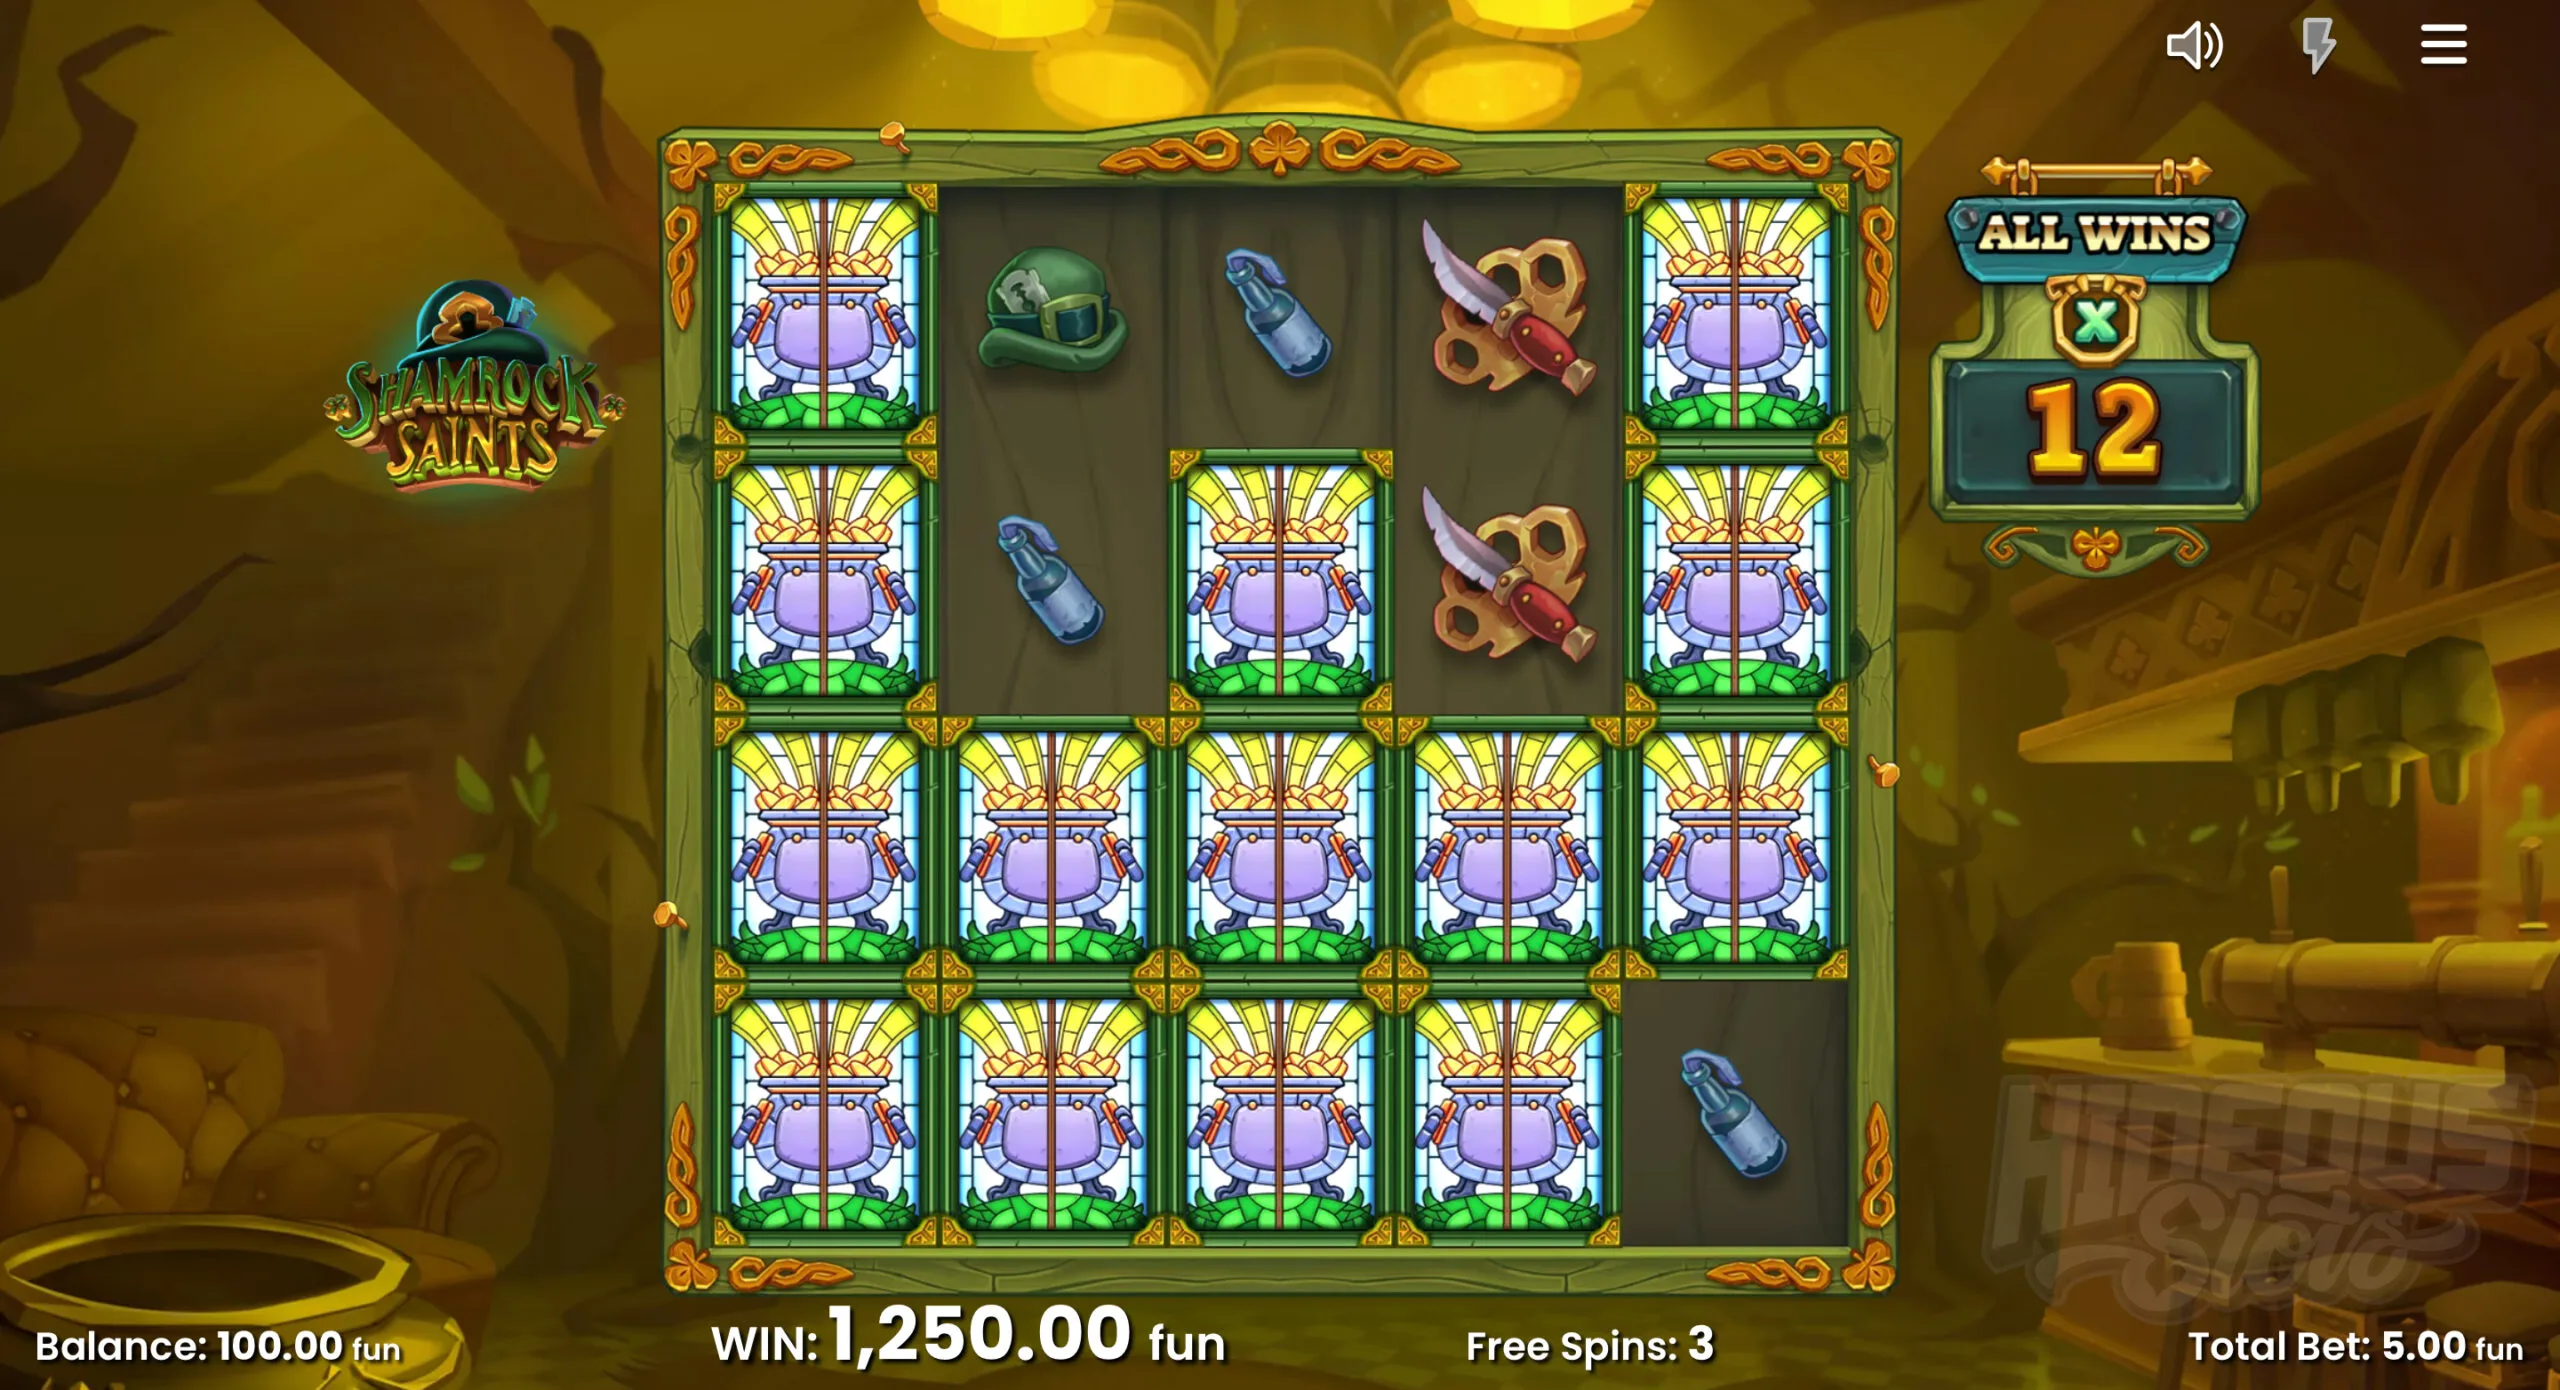 Land Additional Scatter Symbols to Start the Free Spins Feature With a Higher Initial Multiplier